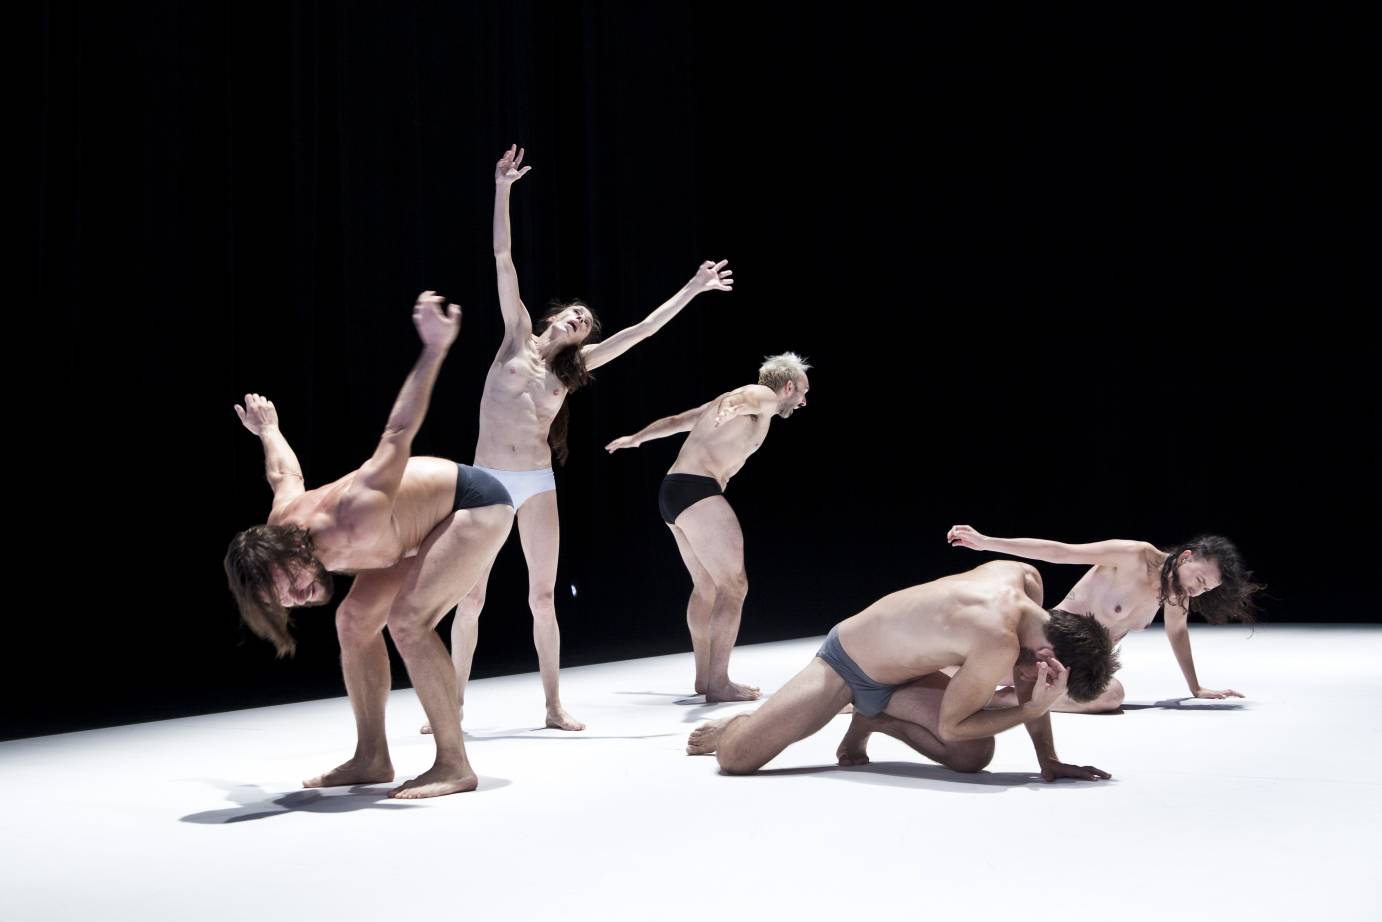 Dancers fold over their bodies, mouths open